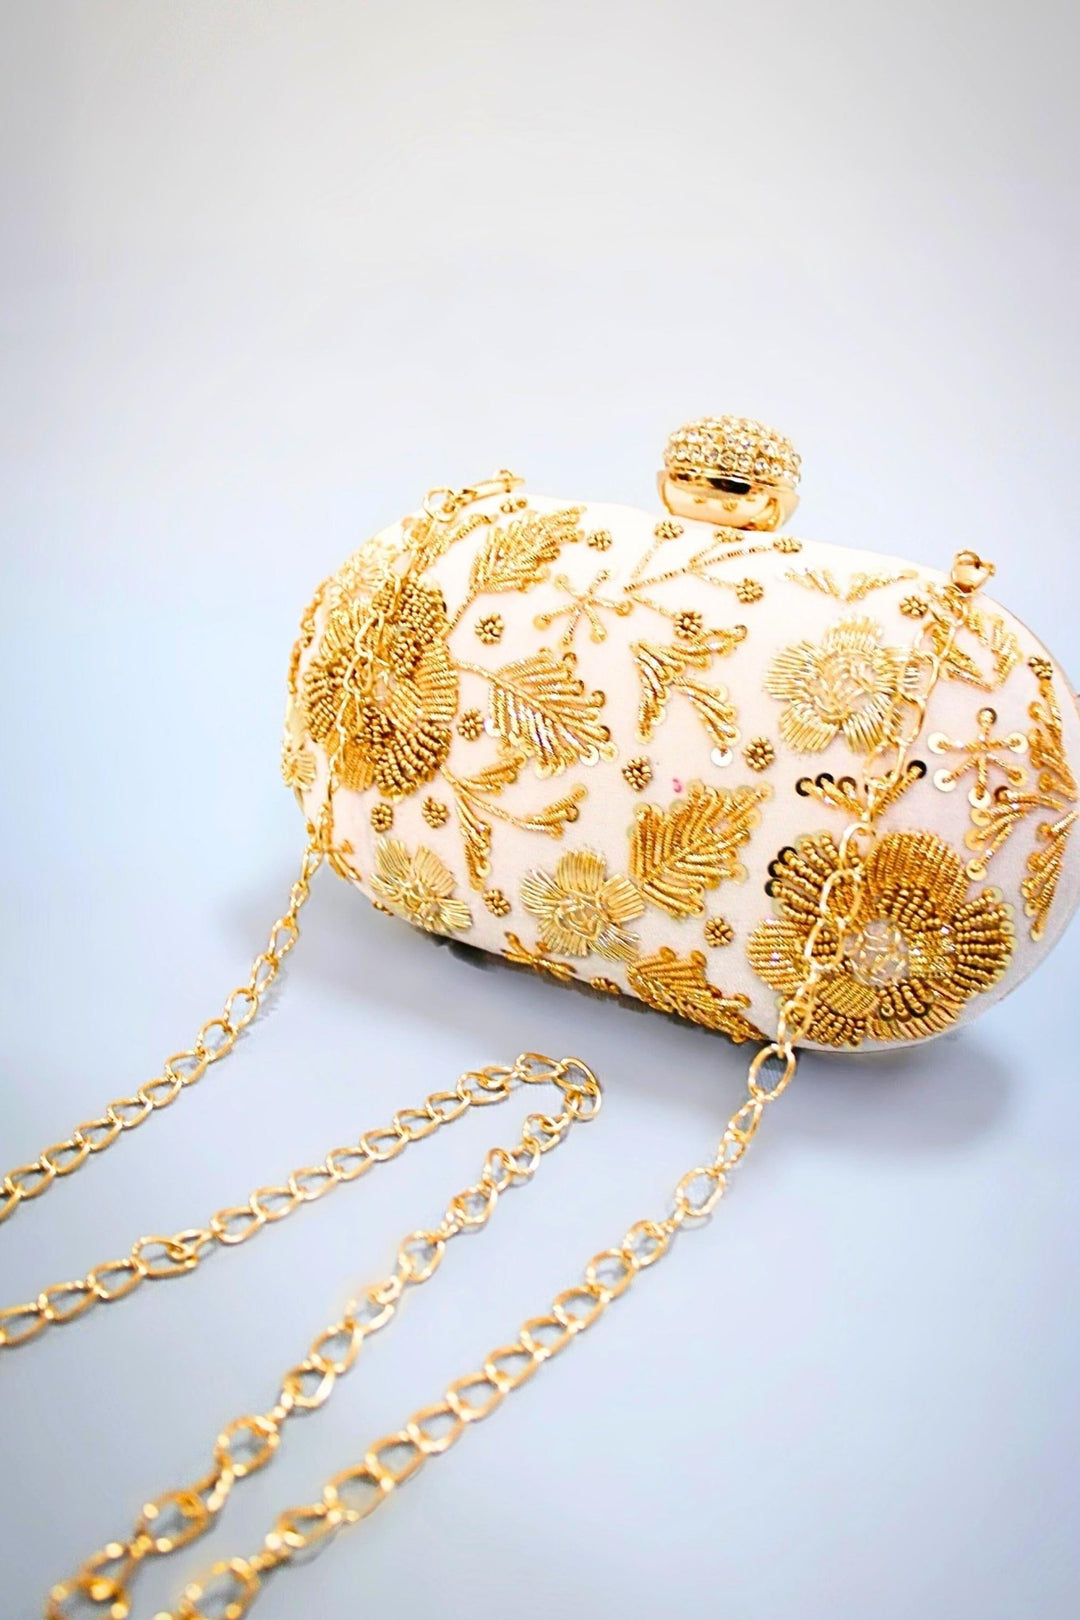 Shagreen Clutch by Scotstyle, Black + Gold – Paloma and Co.